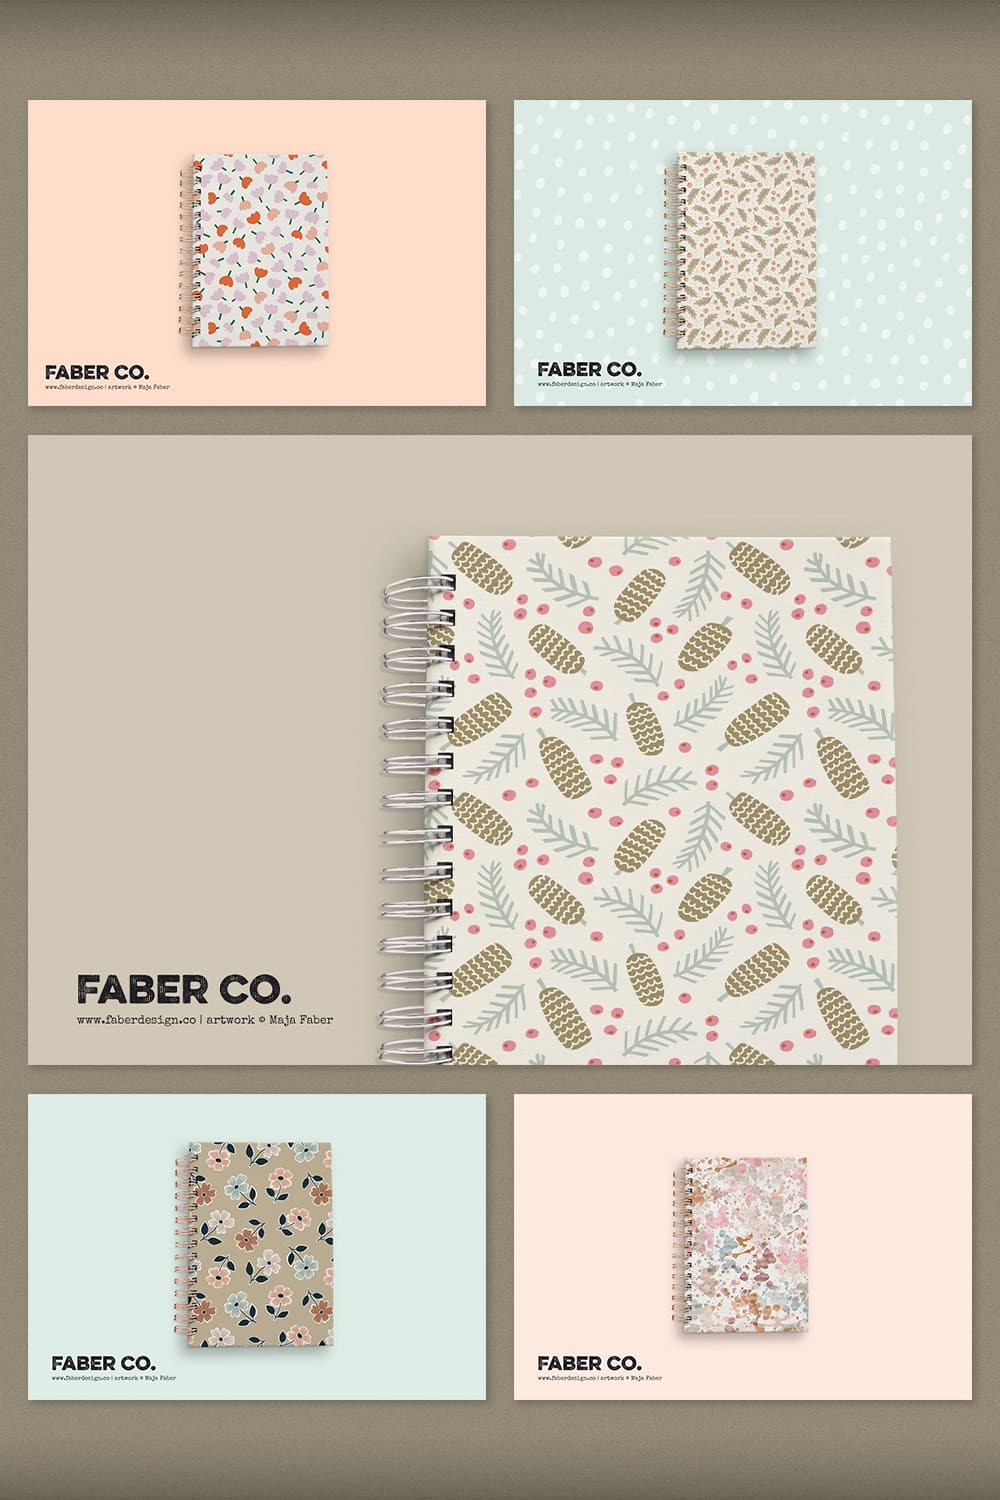 Beautiful background images for notebooks and diaries.